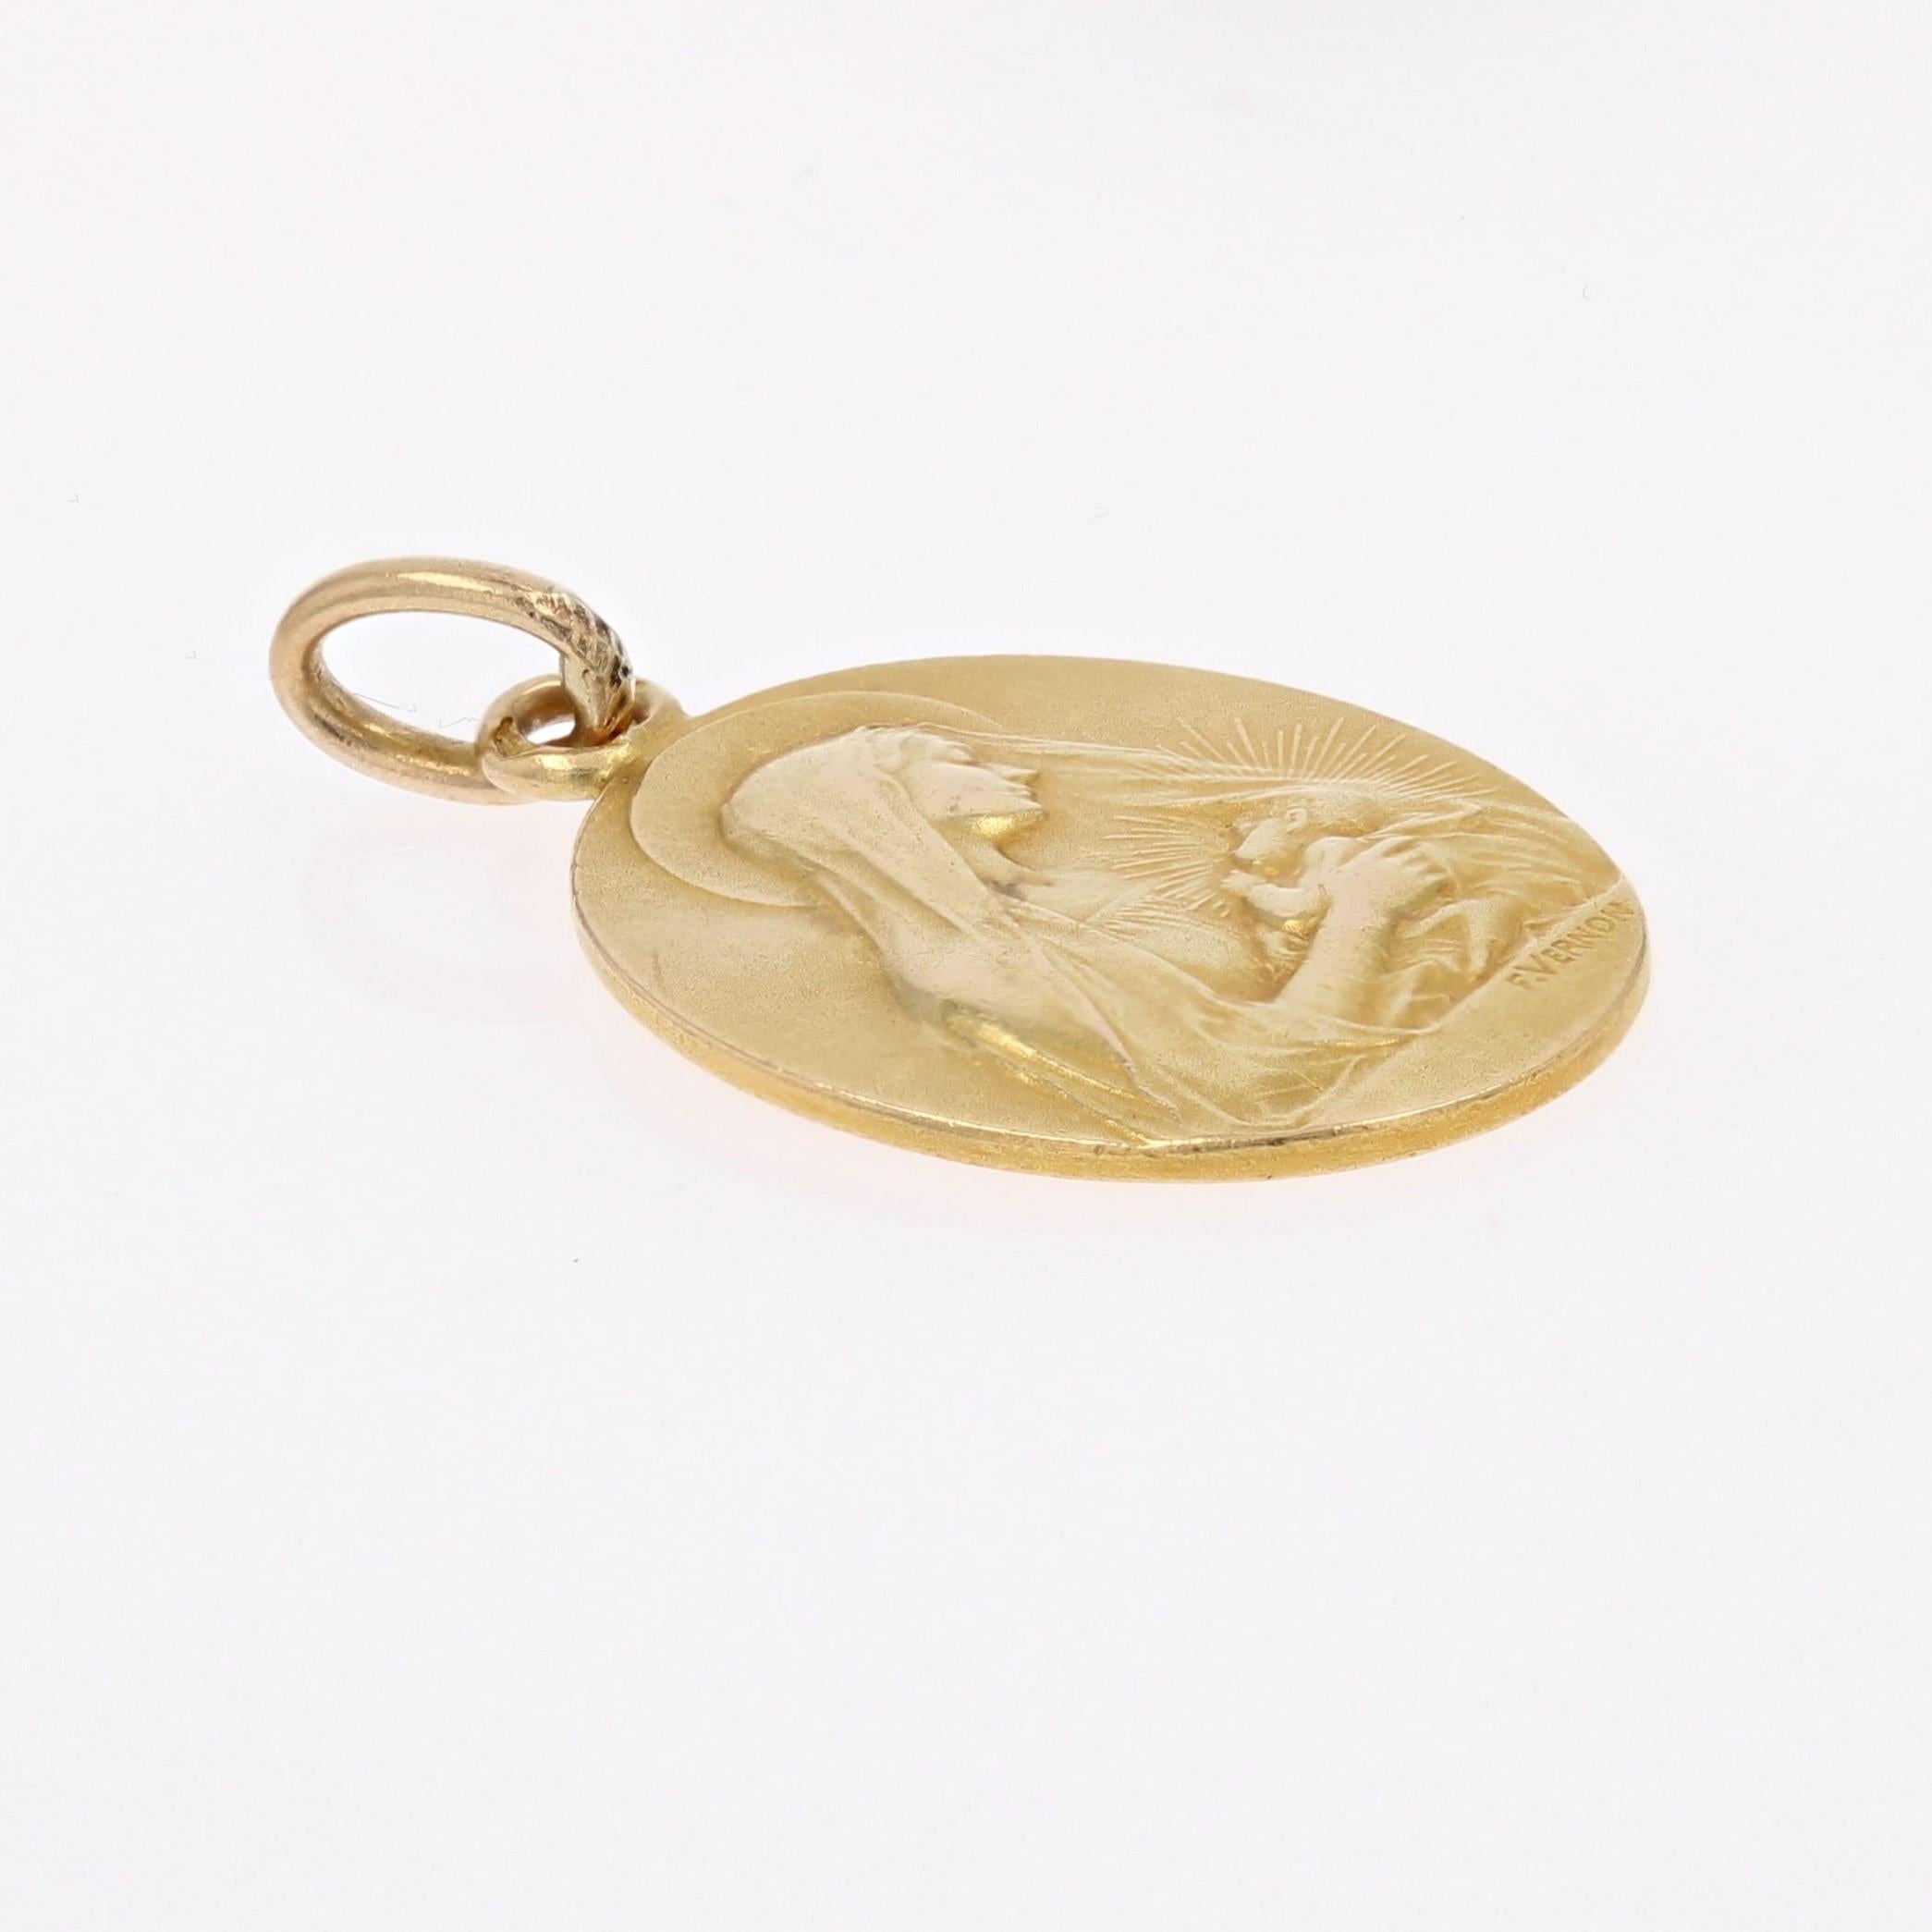 Medal in 18 karat yellow gold, eagle head hallmark.
Antique oval shape medal, it represents the Virgin with the Child. This religious pendant is signed F. Vernon.
The back is engraved : 